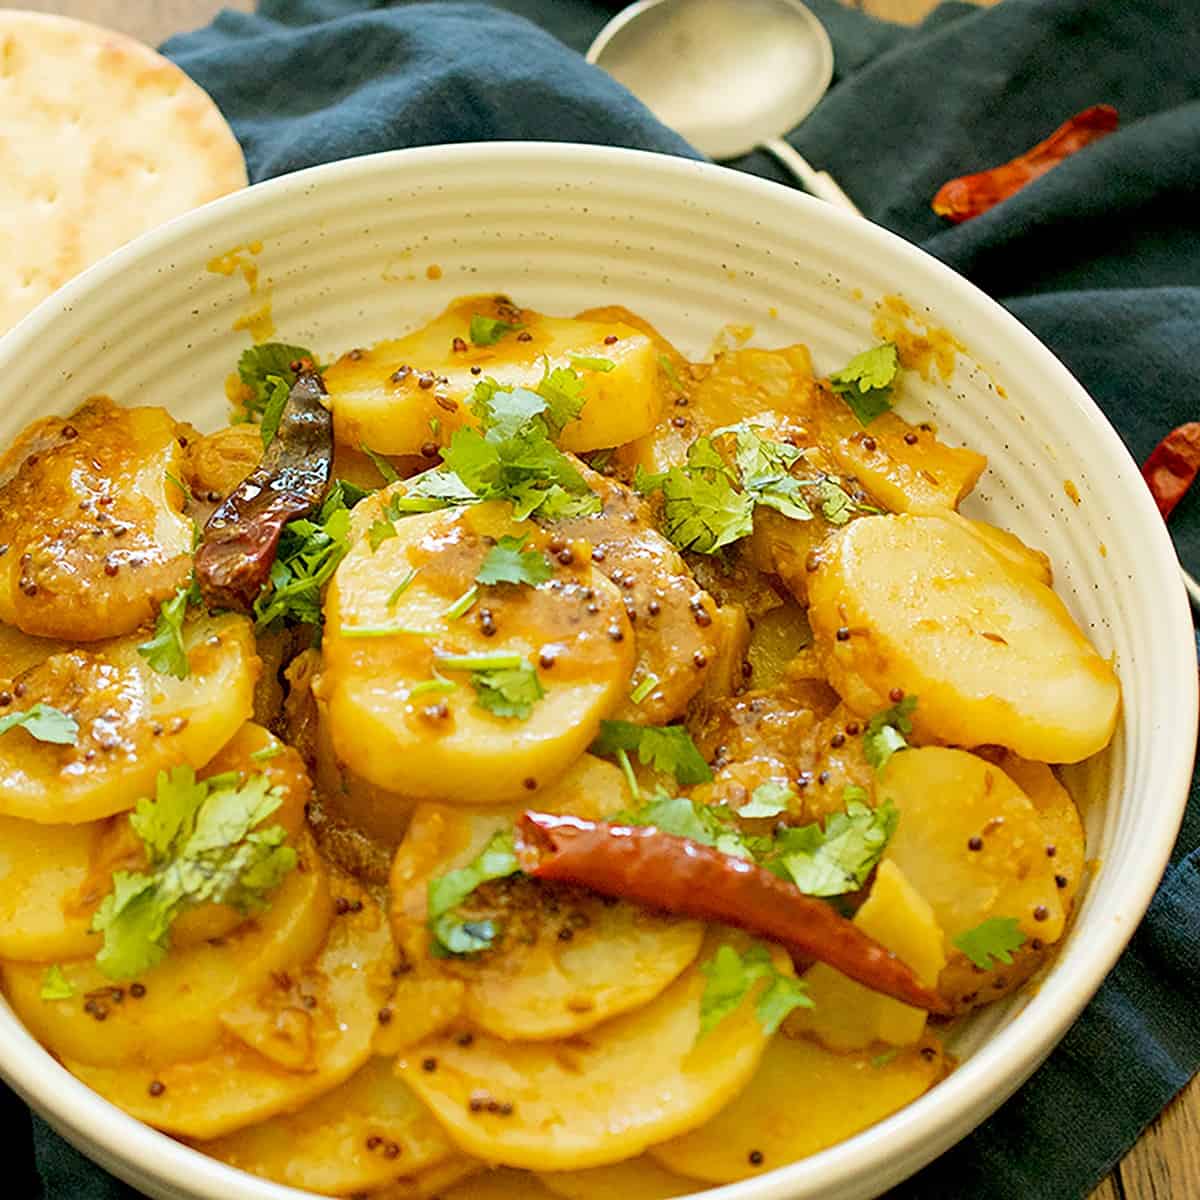 Cooked aloo bhujia, garnished with some cilantro, is plated in a white bowl and is served with some naan.